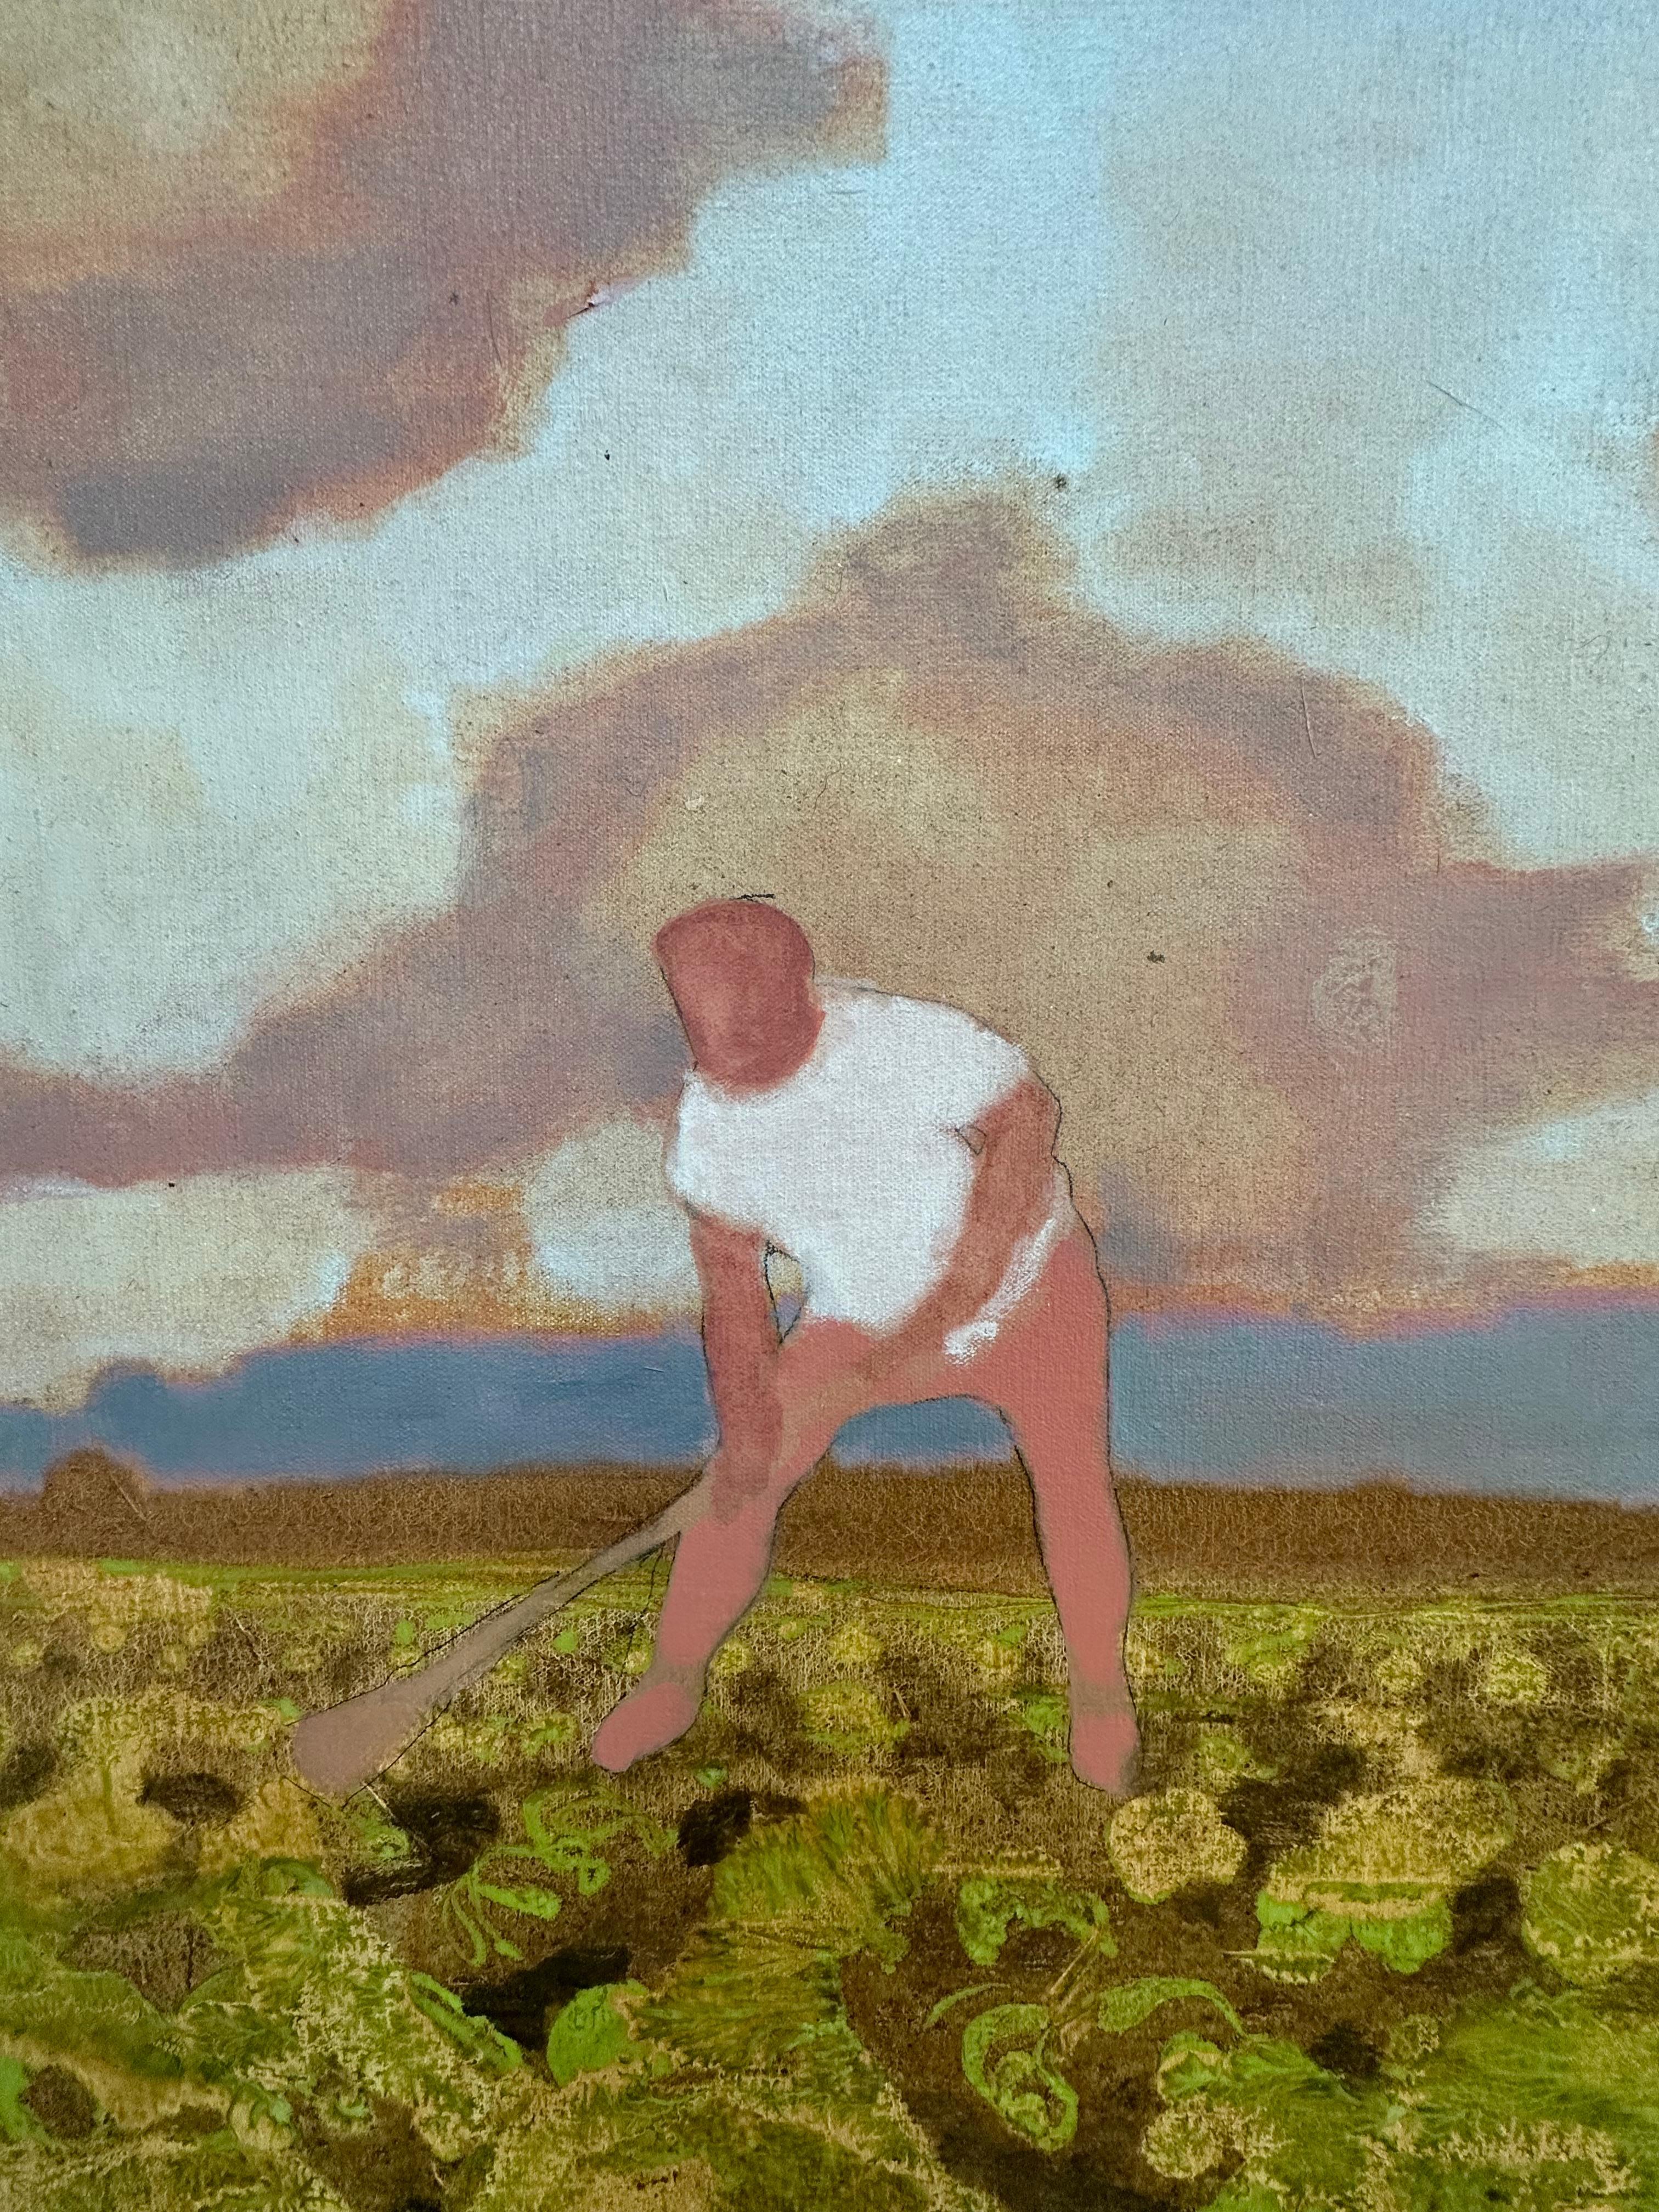 Four farmers, figures in salmon pants and white shirts, till a field of lush looking olive green and yellow ochre cabbage beneath an expansive gray blue sky with salmon colored cumulus clouds. Signed, dated and titled on verso.

David Konigsberg